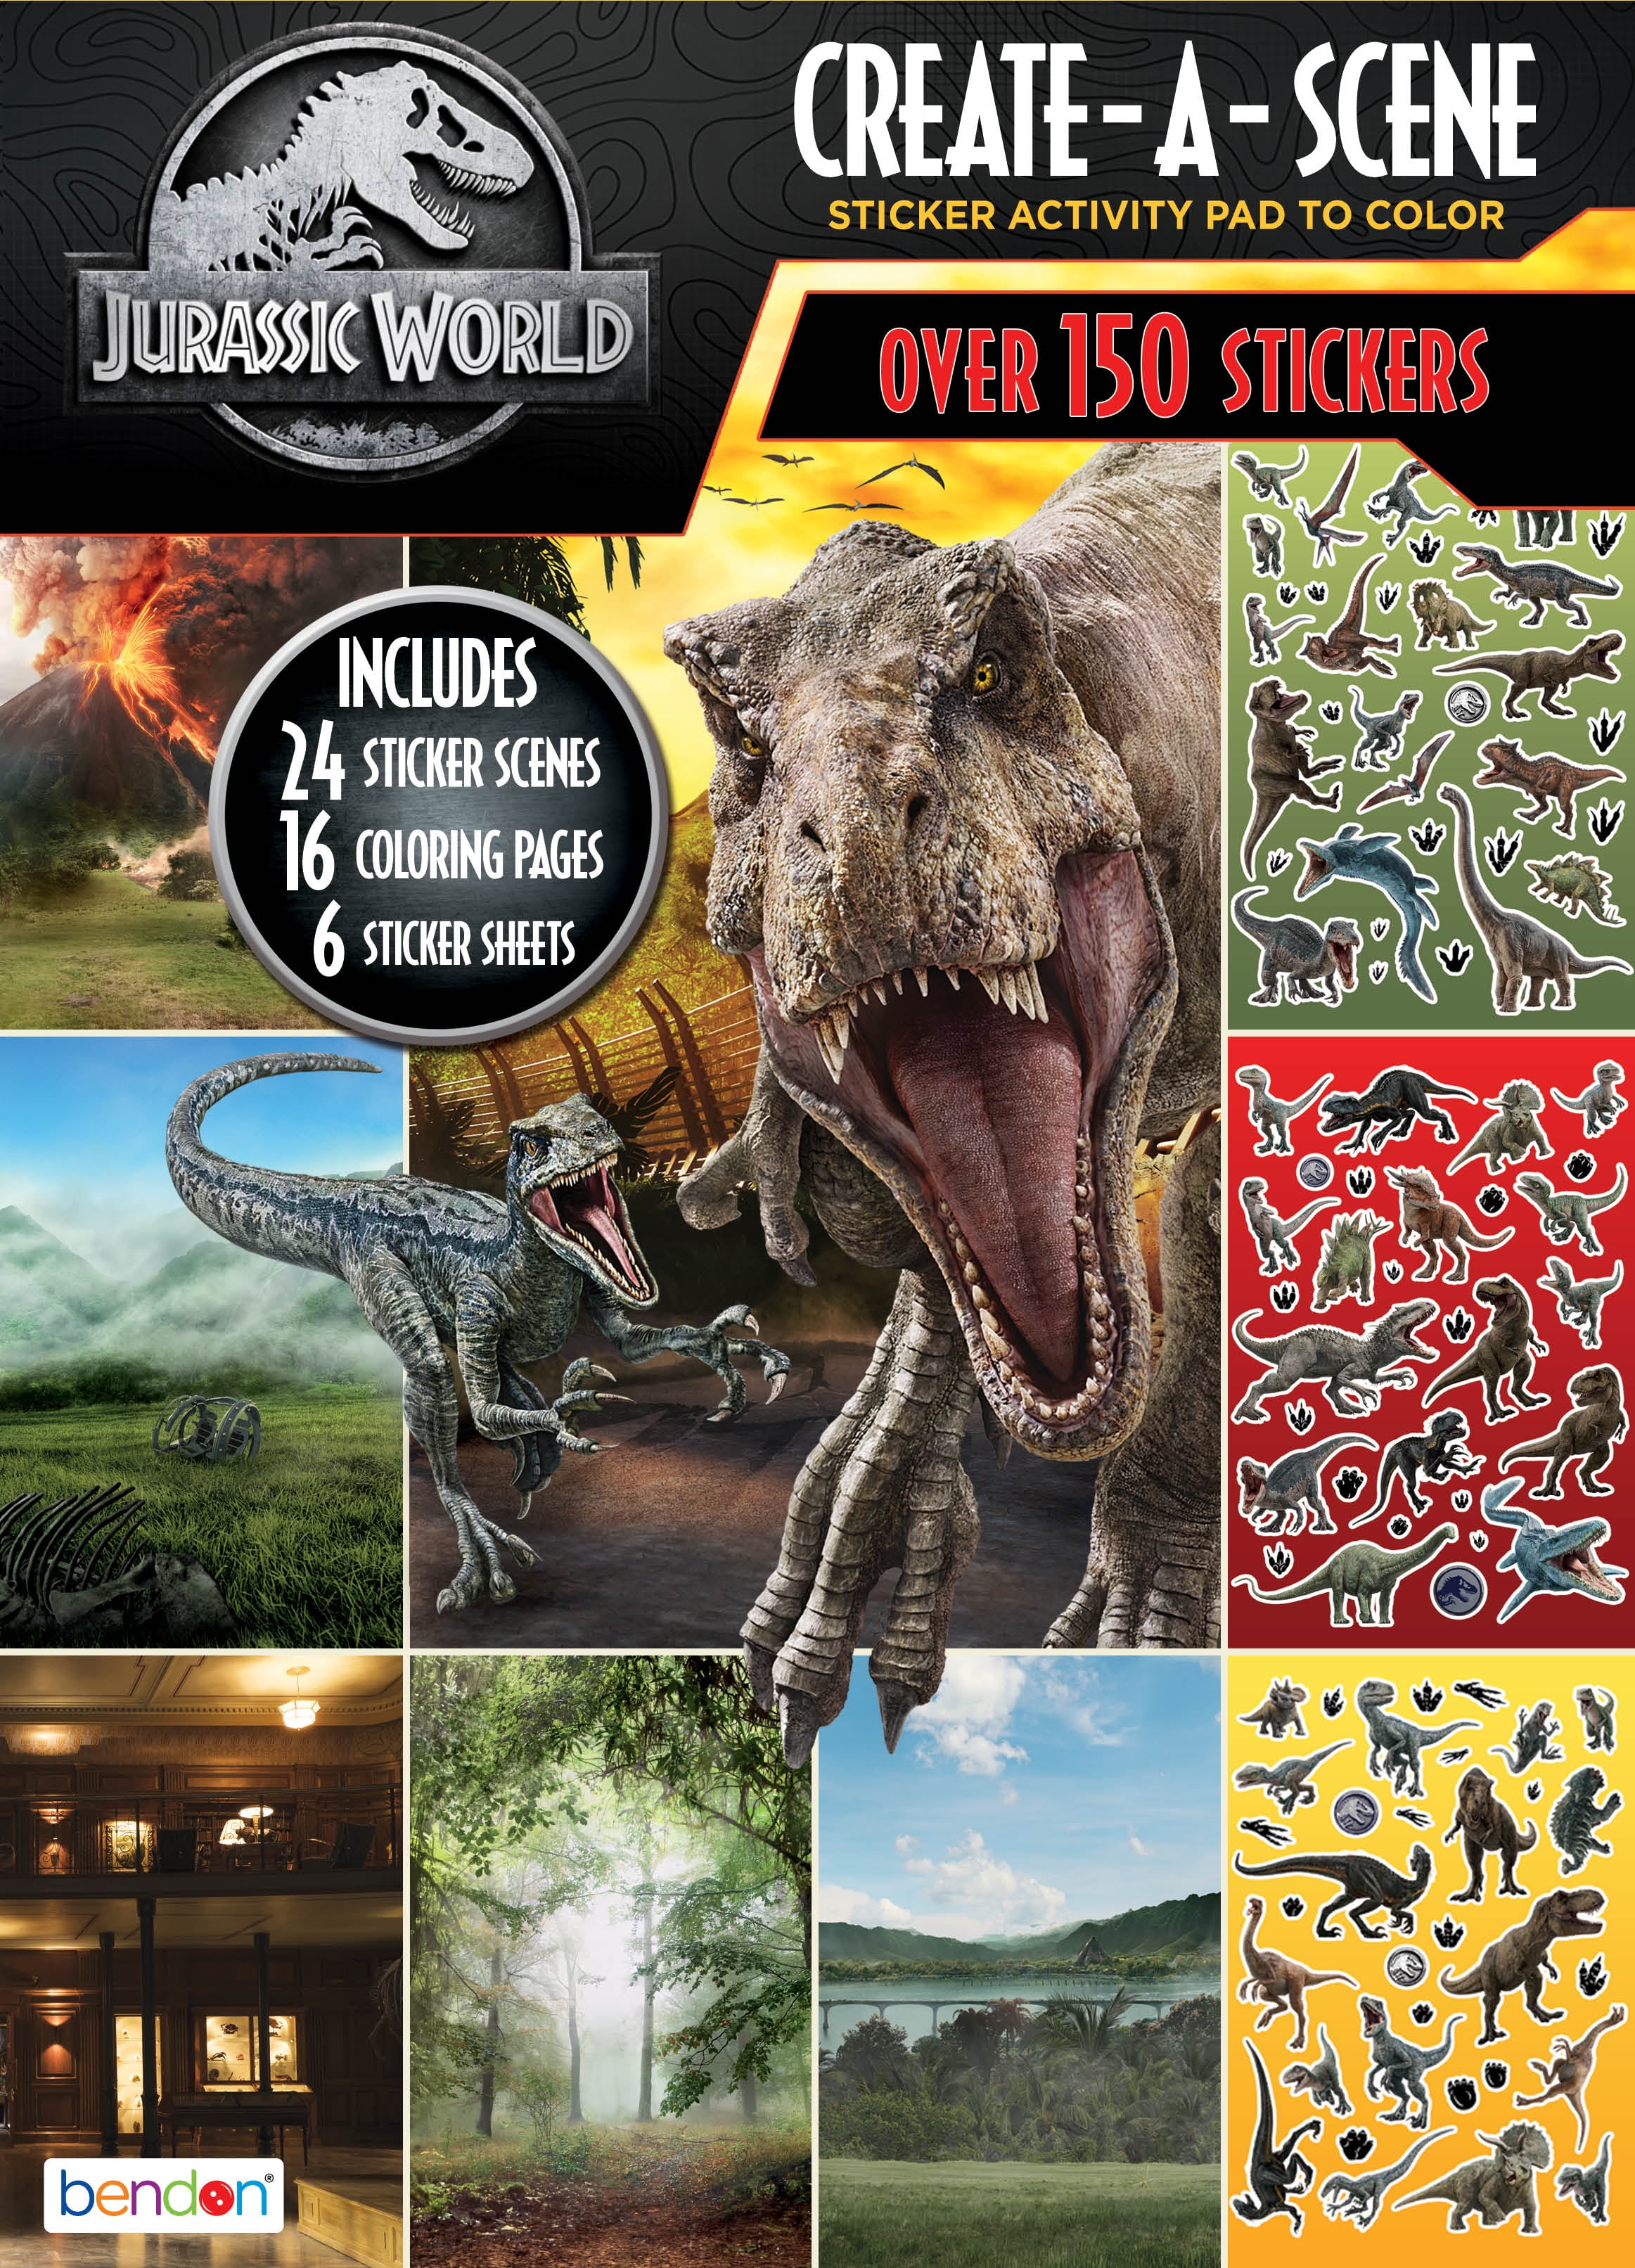 Jurassic World Giant Stickers 23ct Stick & Remove Anywhere School Use Park Rex 